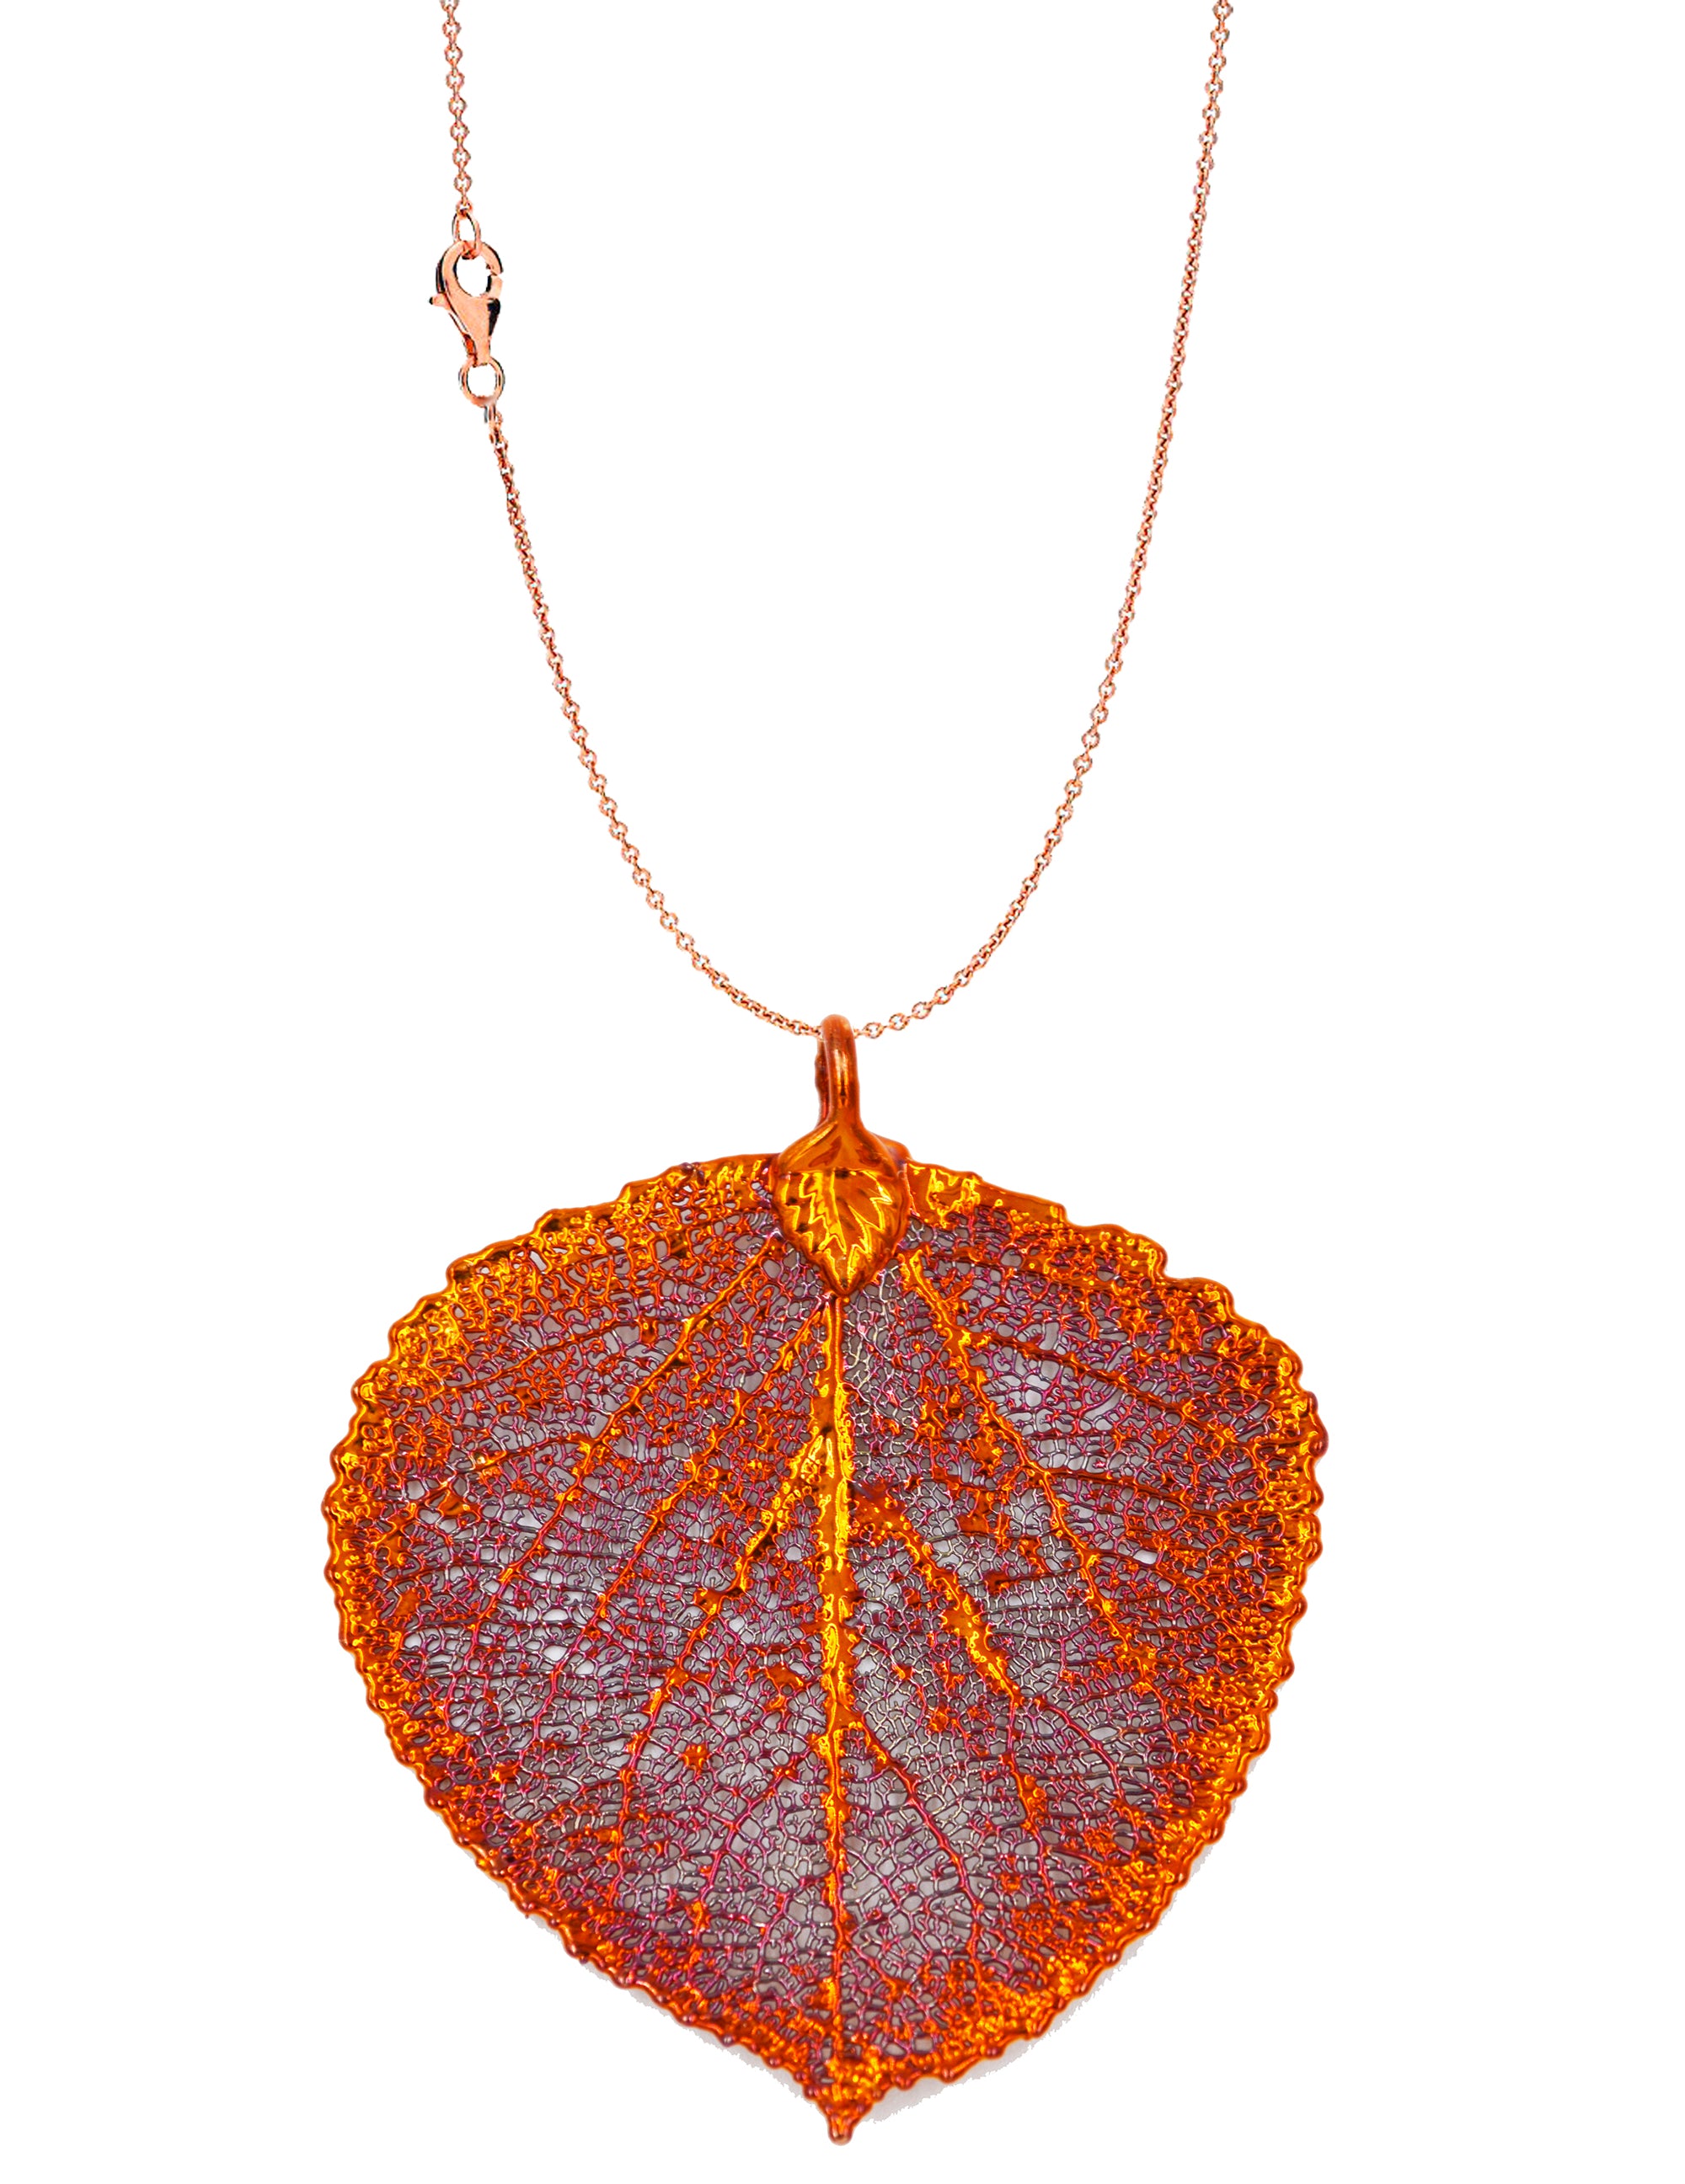 Real Leaf Pendant with Chain ASPEN Dipped in Copper Genuine Leaf